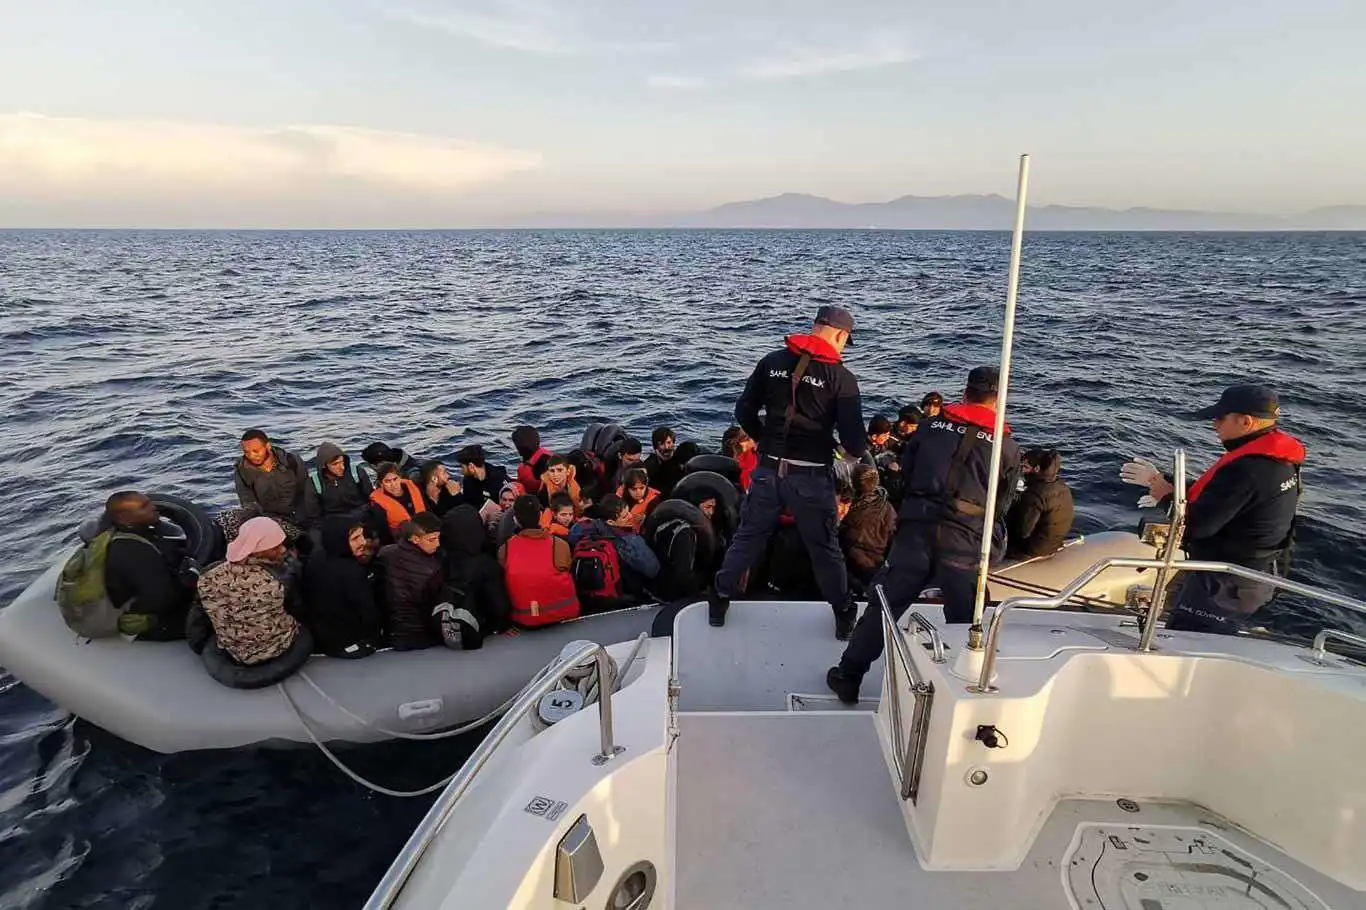 Turkish coast guard rescues migrants following pushbacks by Greece